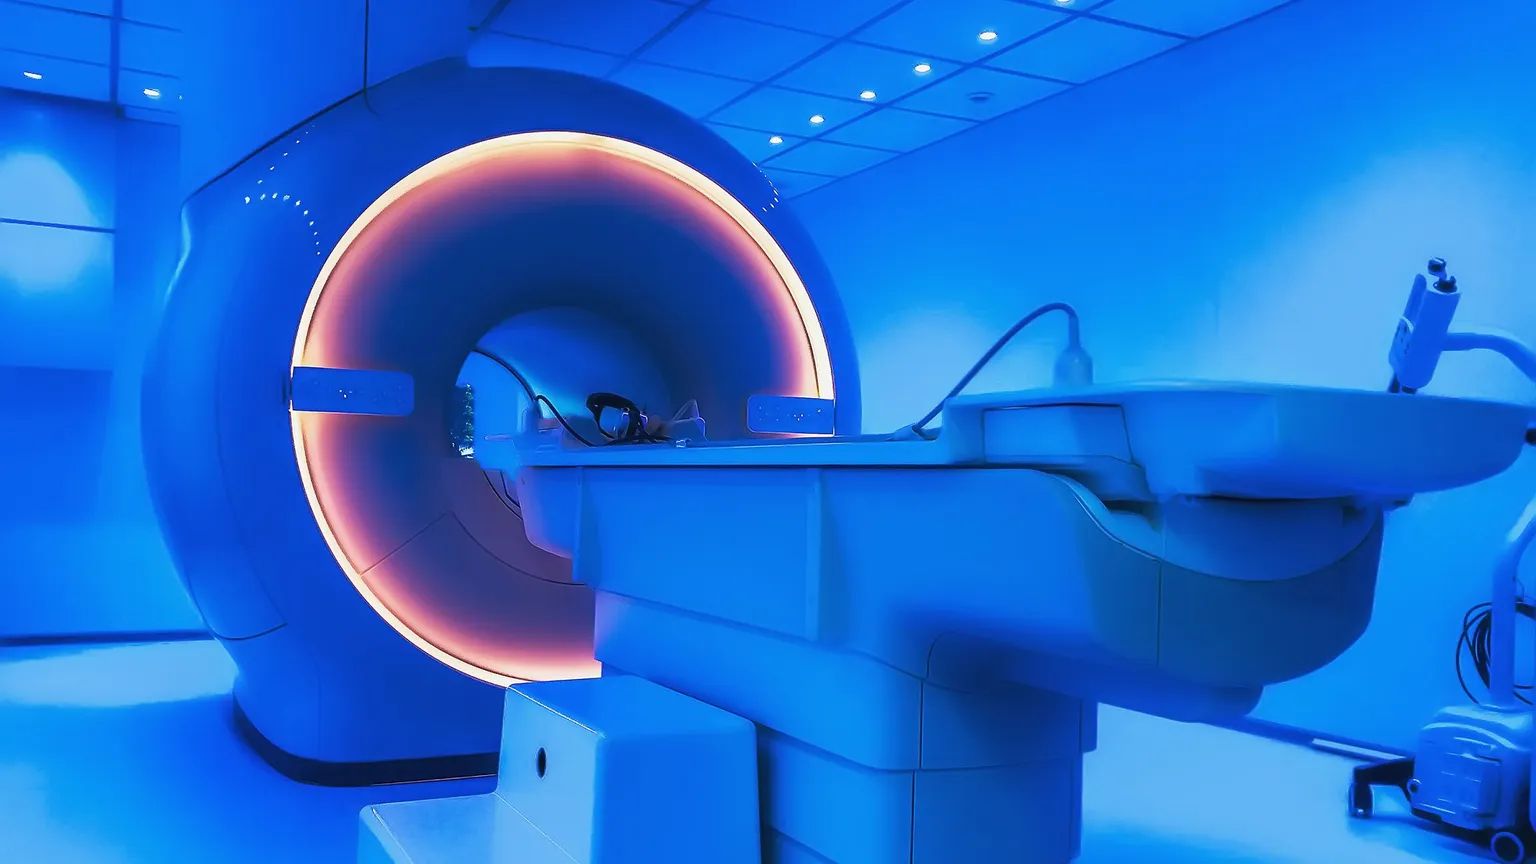 A magnetic resonance tomography imaging scan machine. Image: Shutterstock